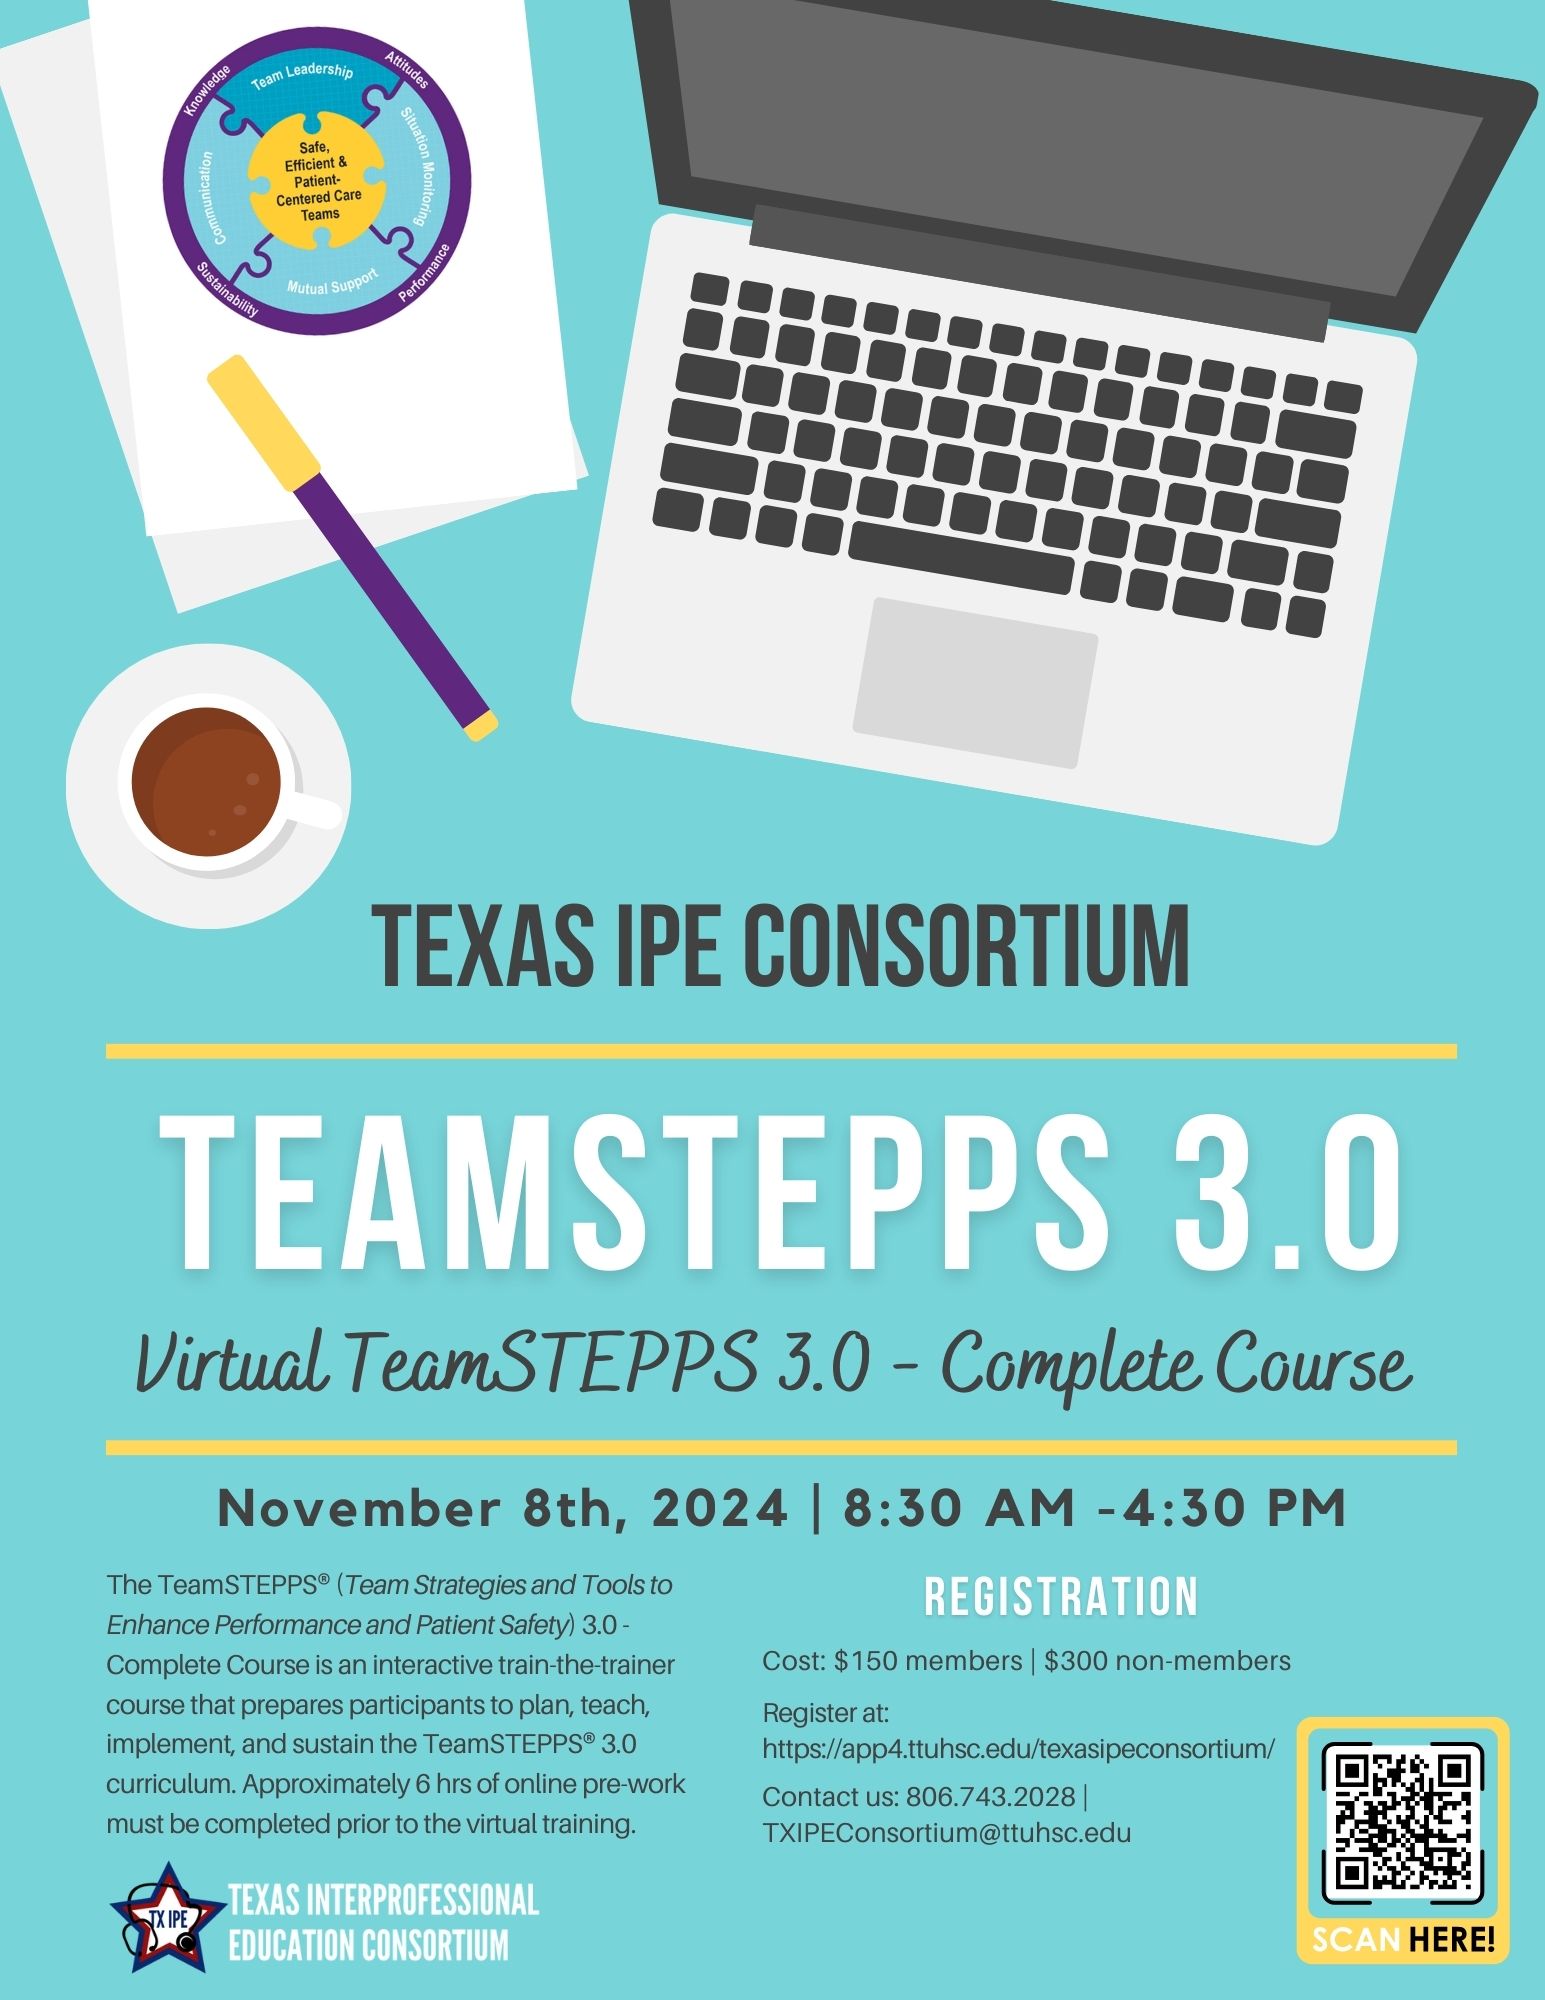 TeamSTEPPS Virtual Master Training Course November 12, 2021 8:30 AM to 4:30 PM CT